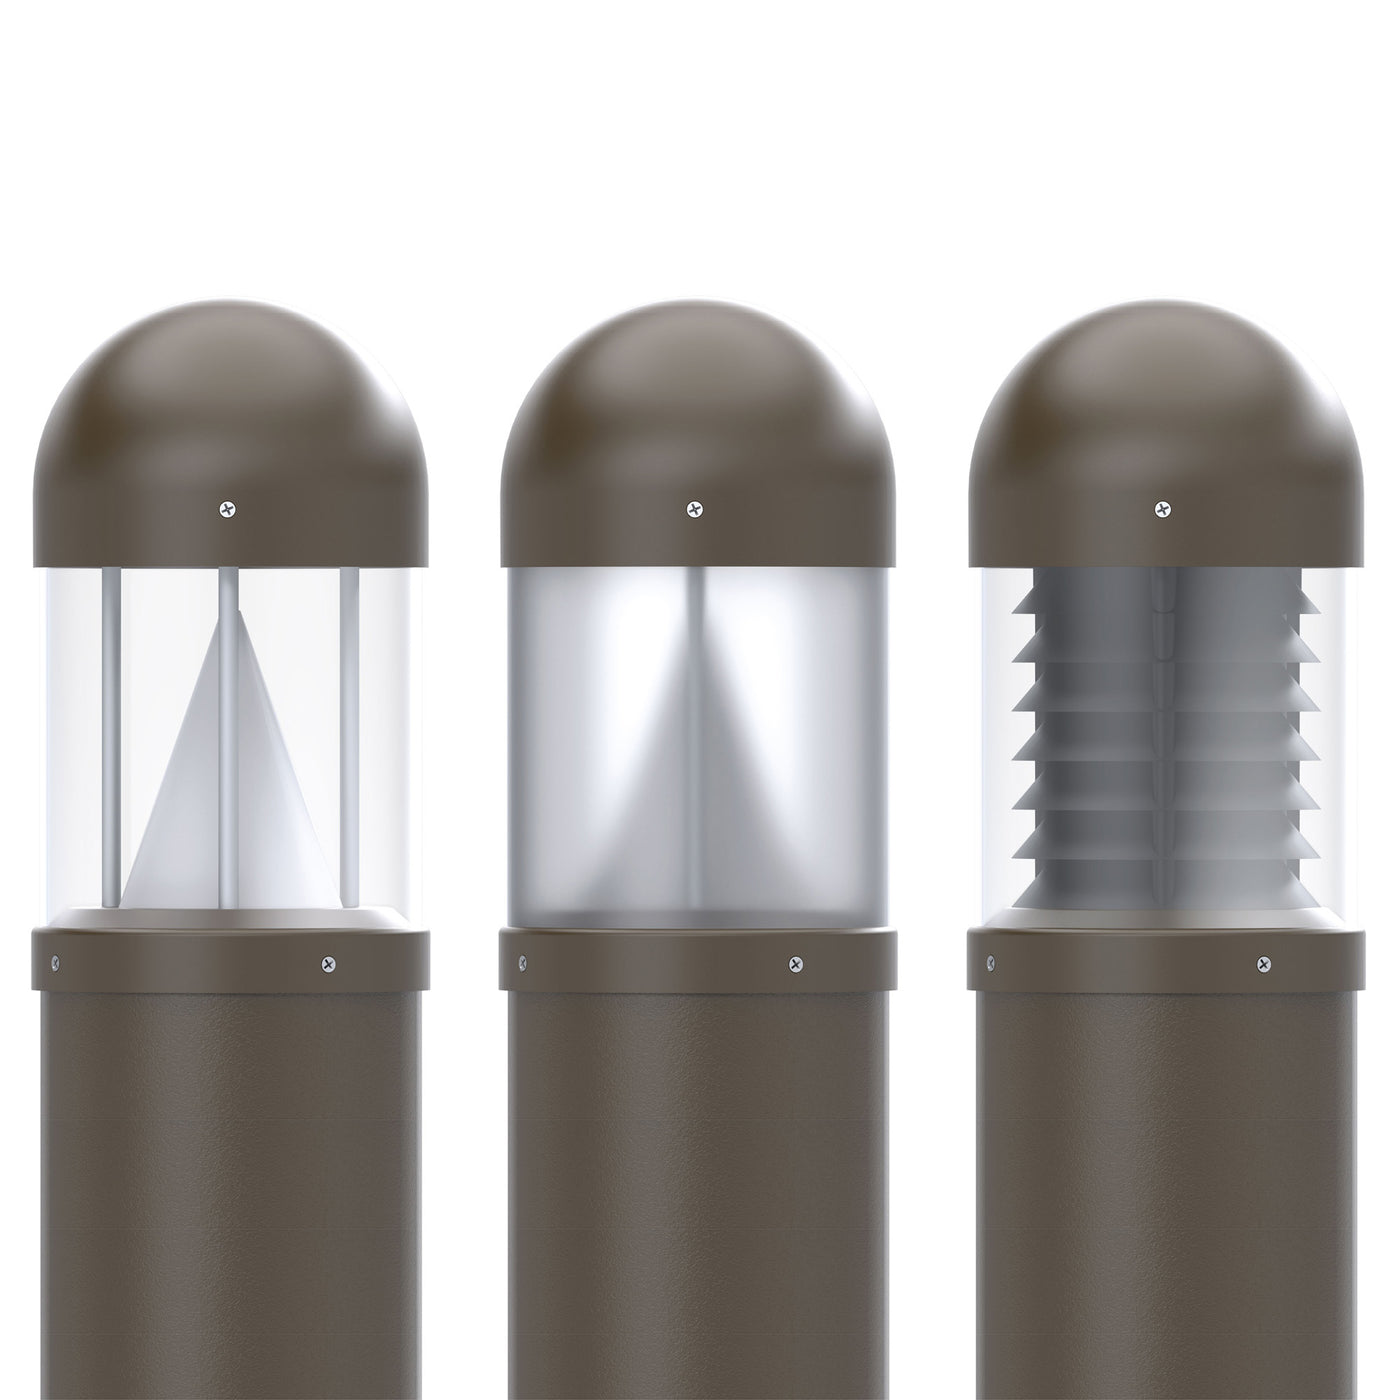 WiLLstudio RDB Round Dome Bollards with all lens options